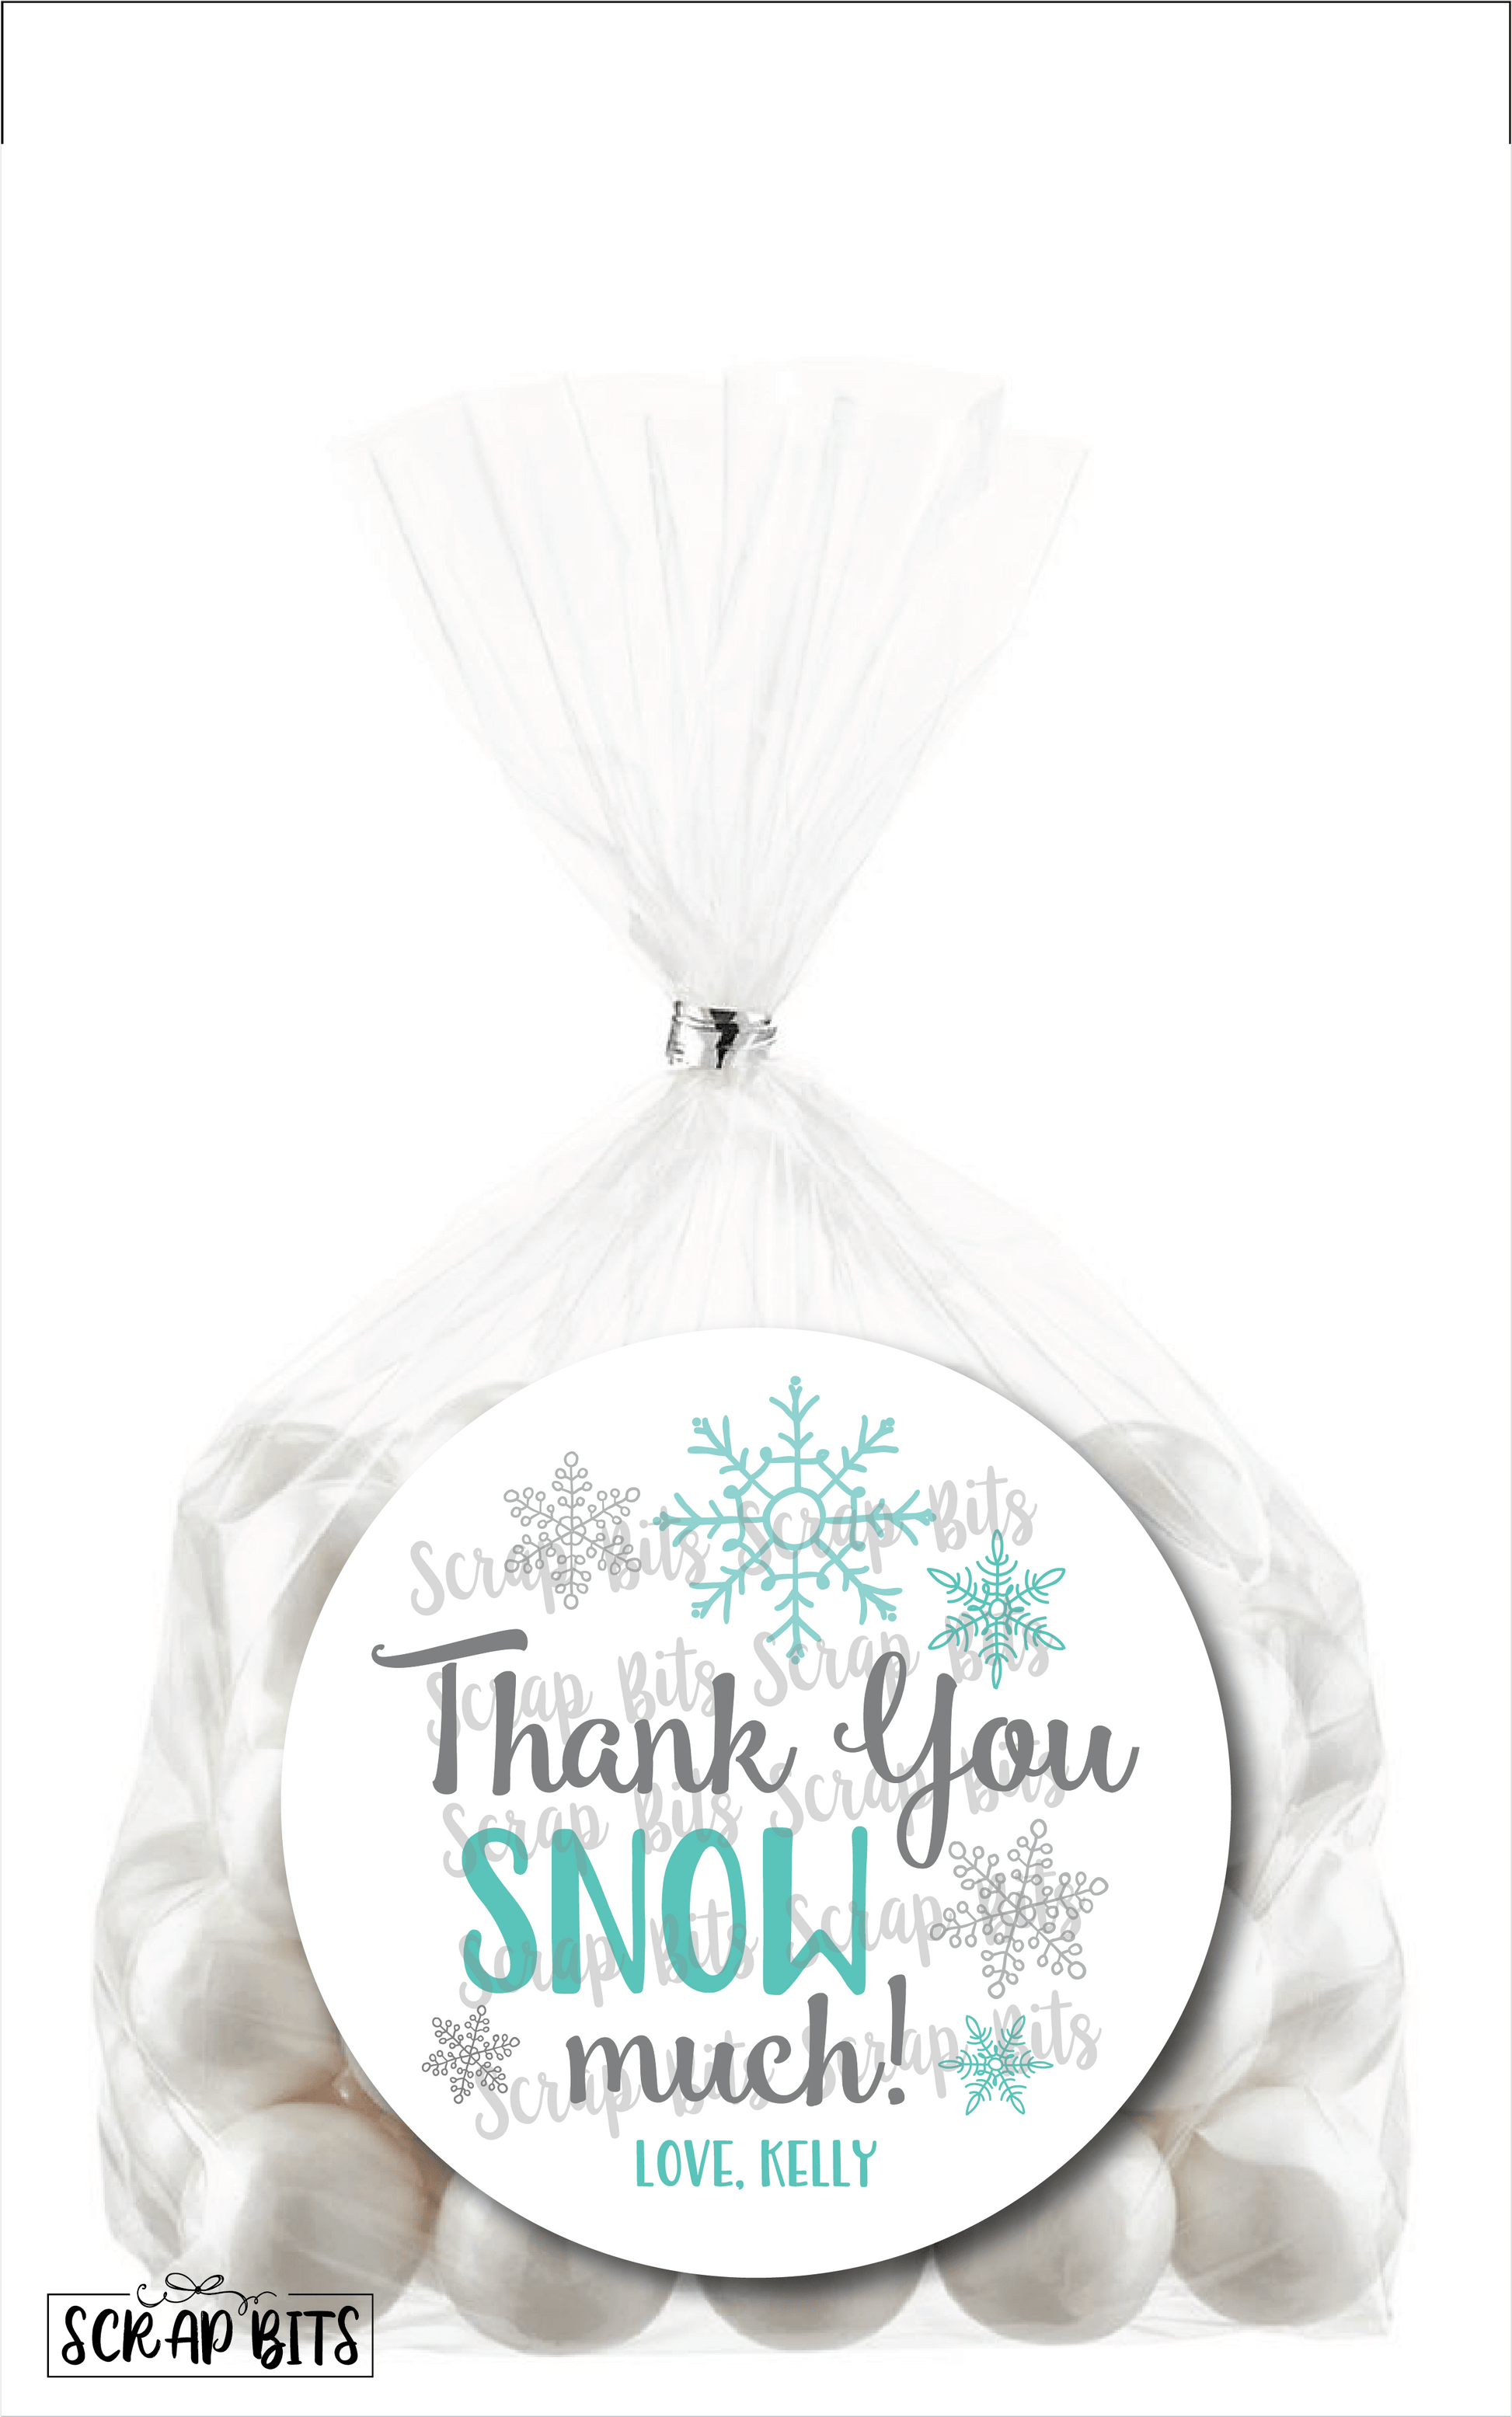 Thank You Snow Much Stickers or Tags . Snowflake Gift Labels - Scrap Bits